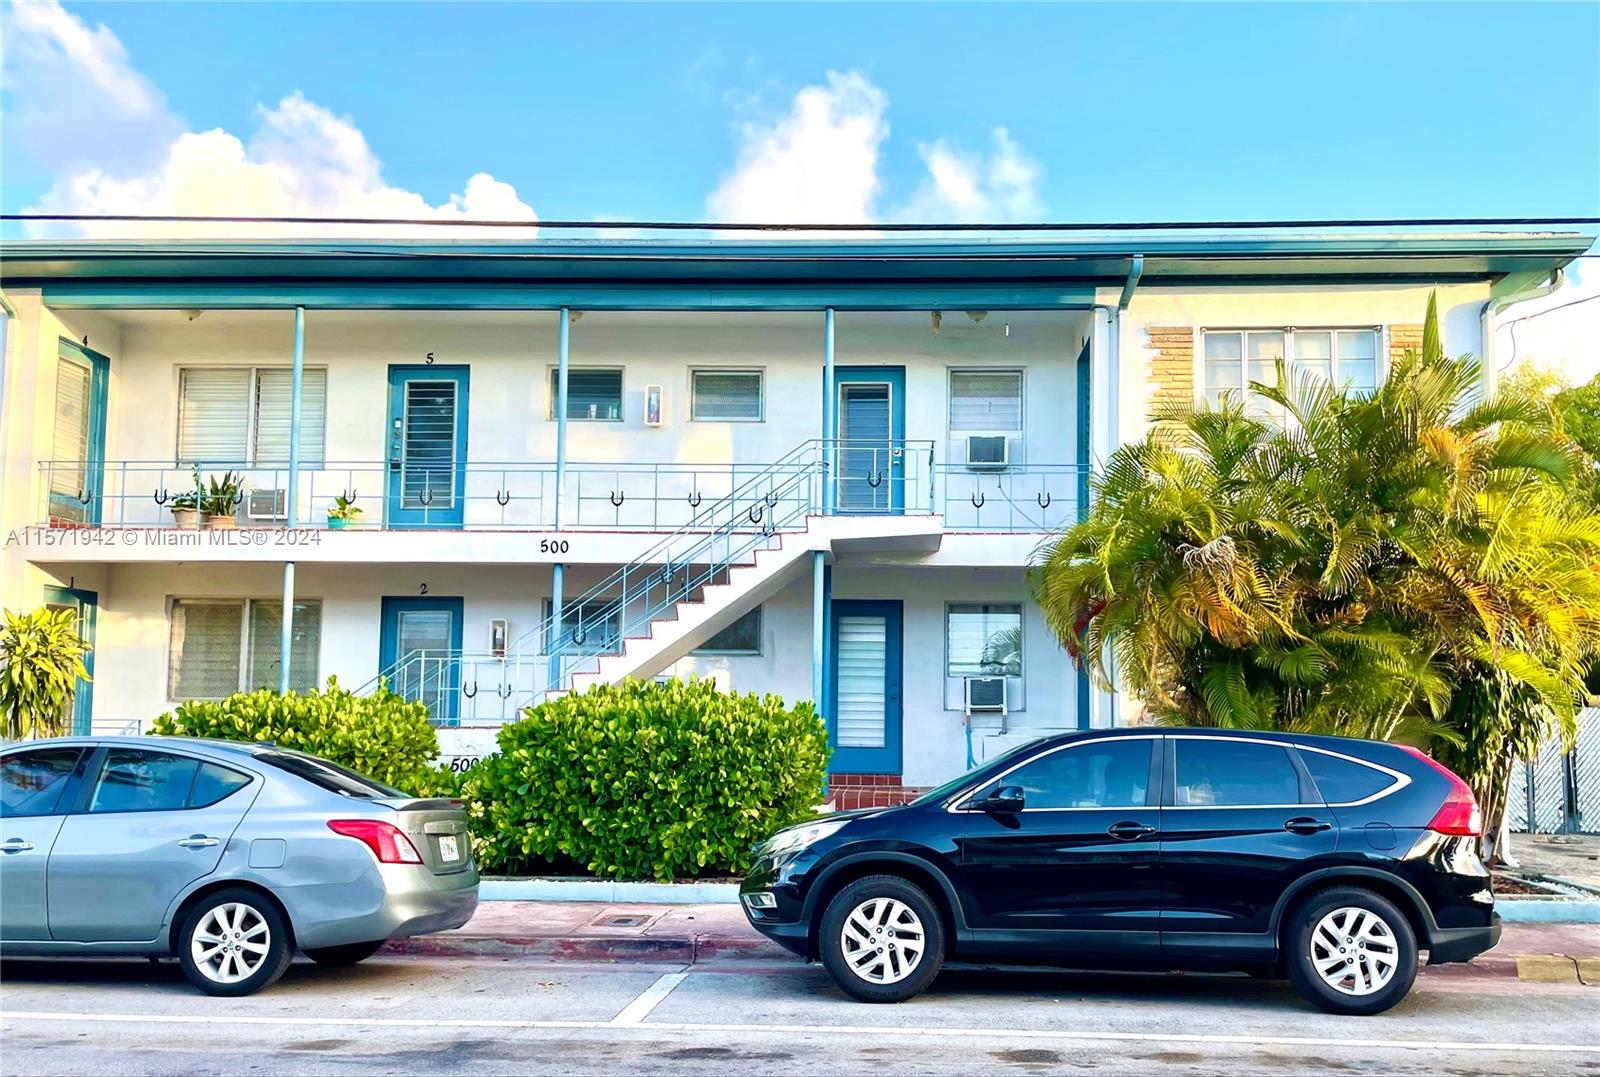 Property for Sale at 500 77th St 3, Miami Beach, Miami-Dade County, Florida - Bedrooms: 2 
Bathrooms: 2  - $387,000